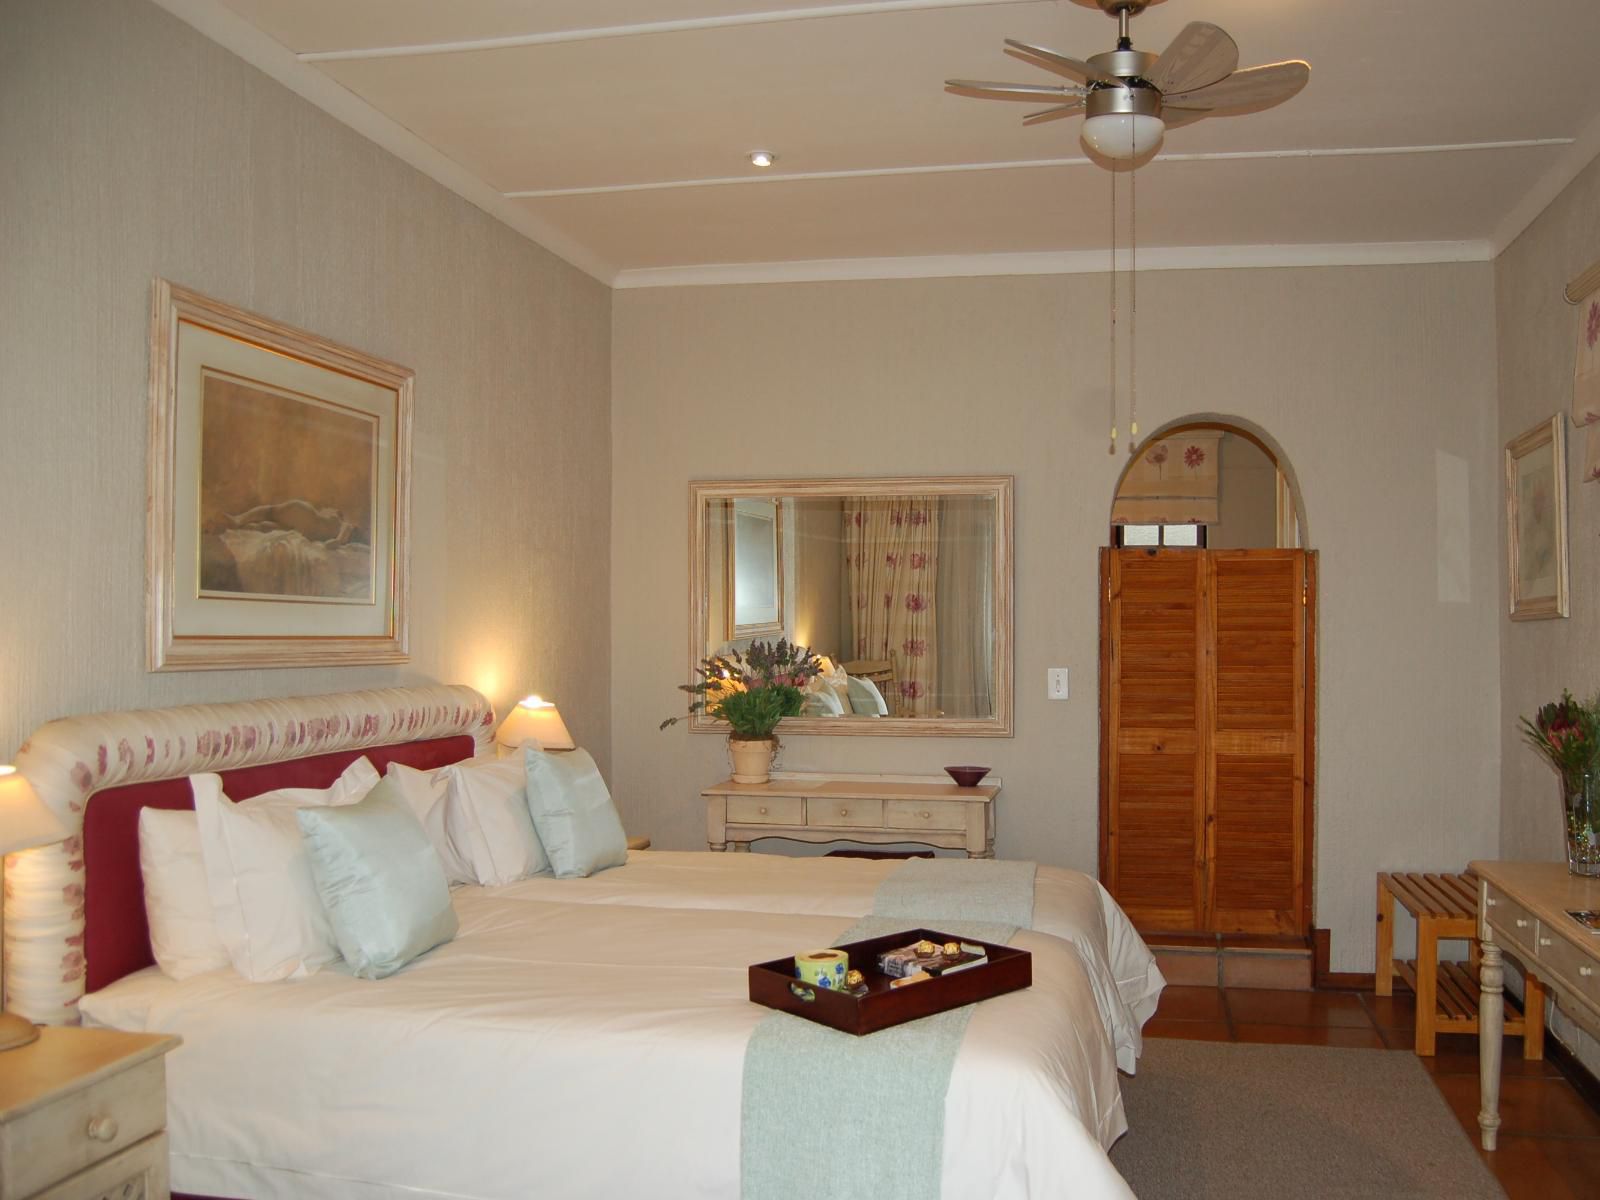 Chestnut Country Lodge Kiepersol Mpumalanga South Africa Bedroom